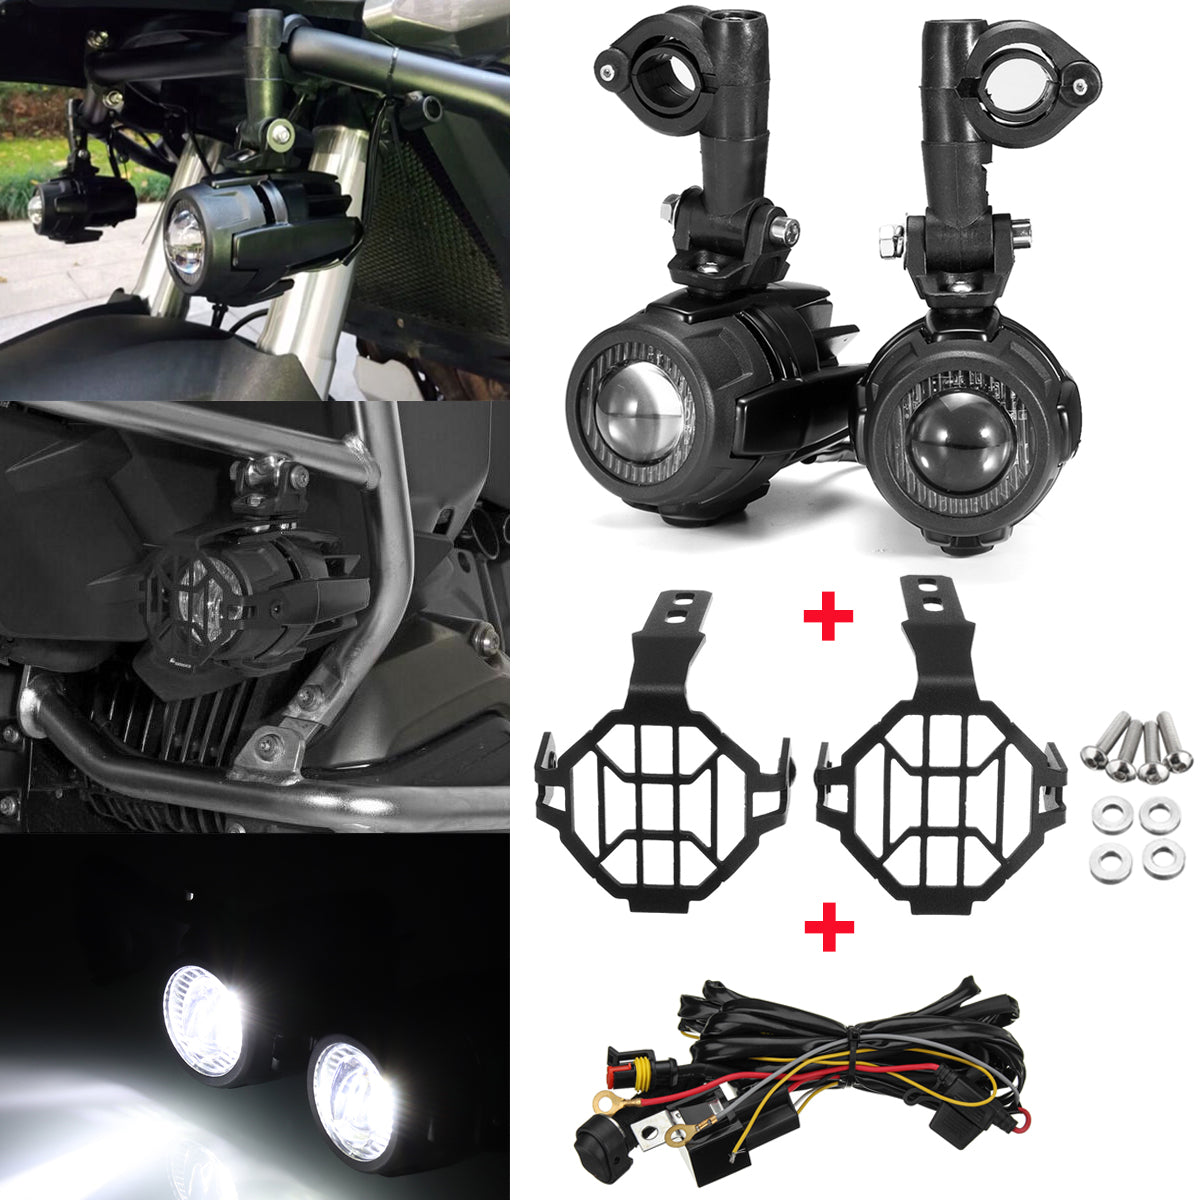 Snow Sencond Generation LED Auxiliary Fog Spot Lamp Aluminum Alloy With Light Protector Guard Cover Harness For BMW R1200GS ADV F800G